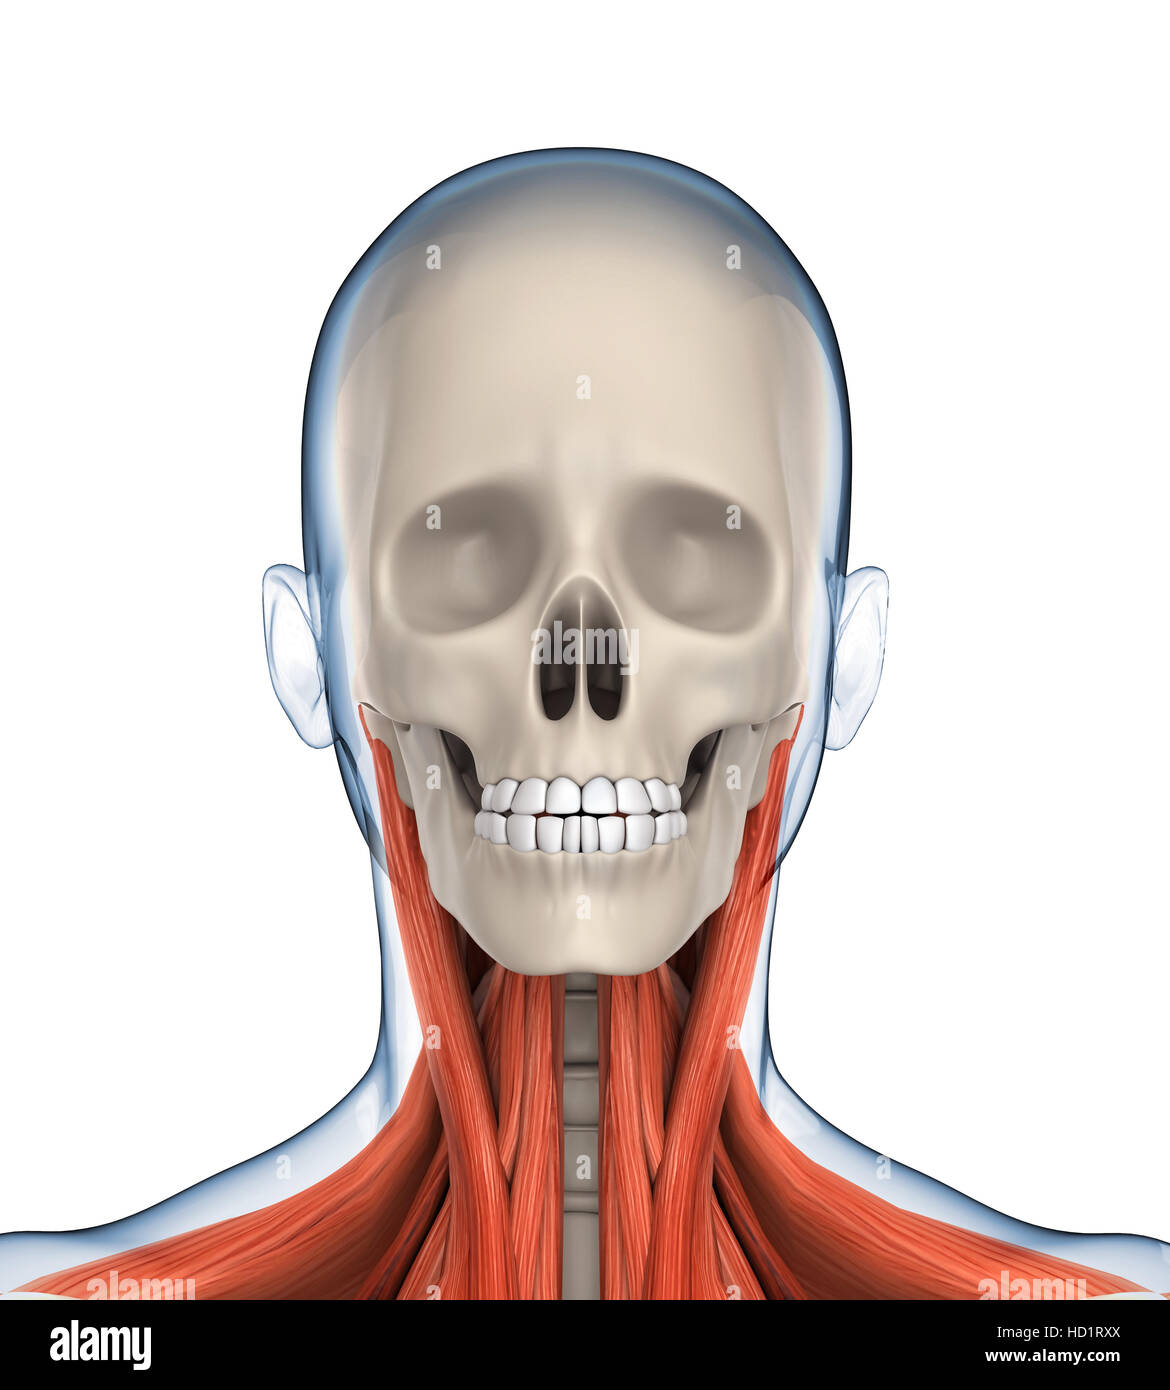 Anatomic Head High Resolution Stock Photography and Images - Alamy